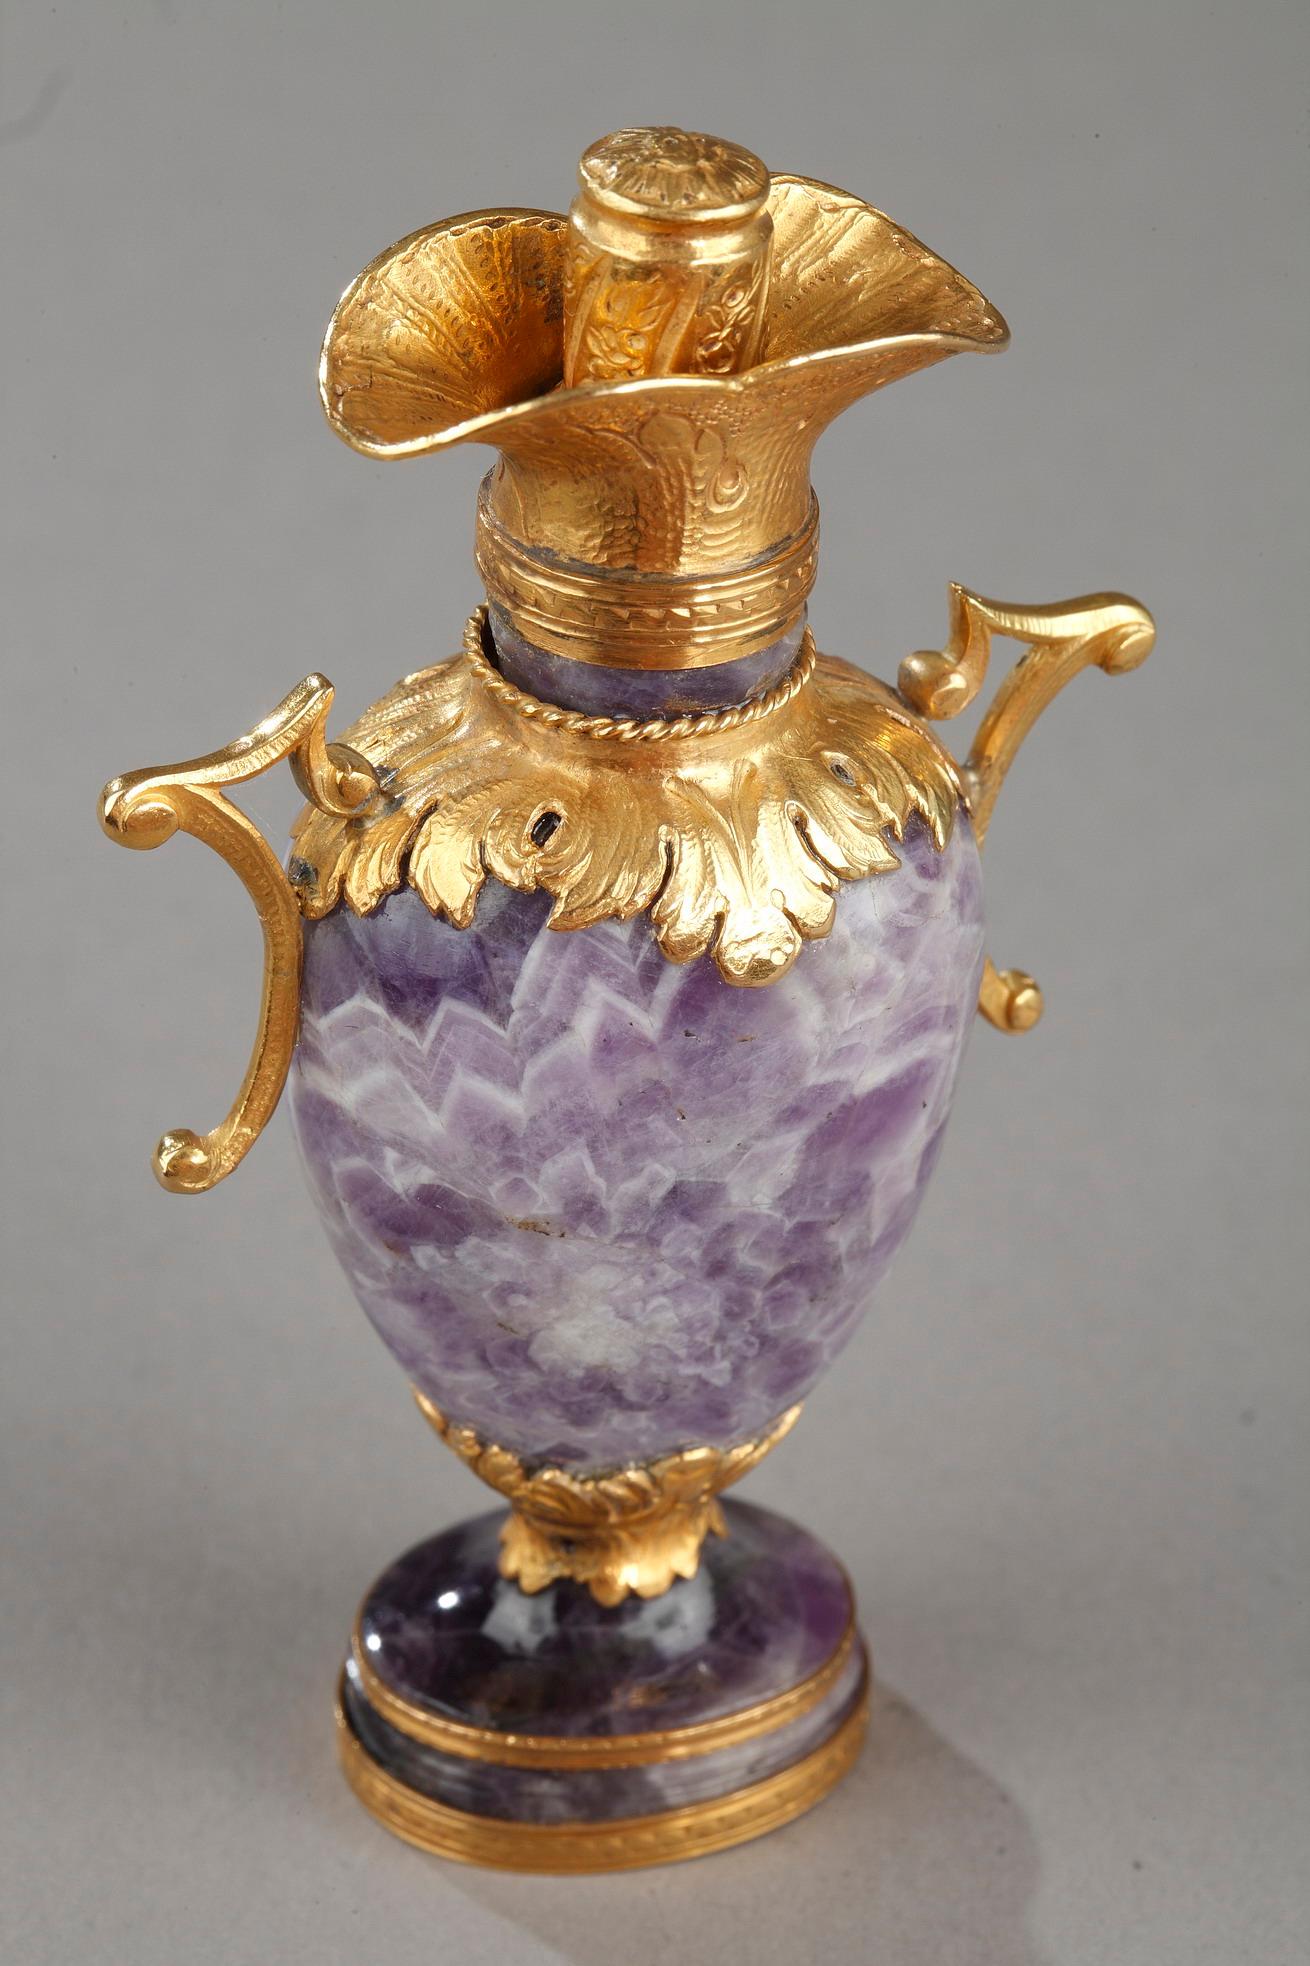 Women's or Men's Gold and Amethyst Perfum Flask, Early 19th Century